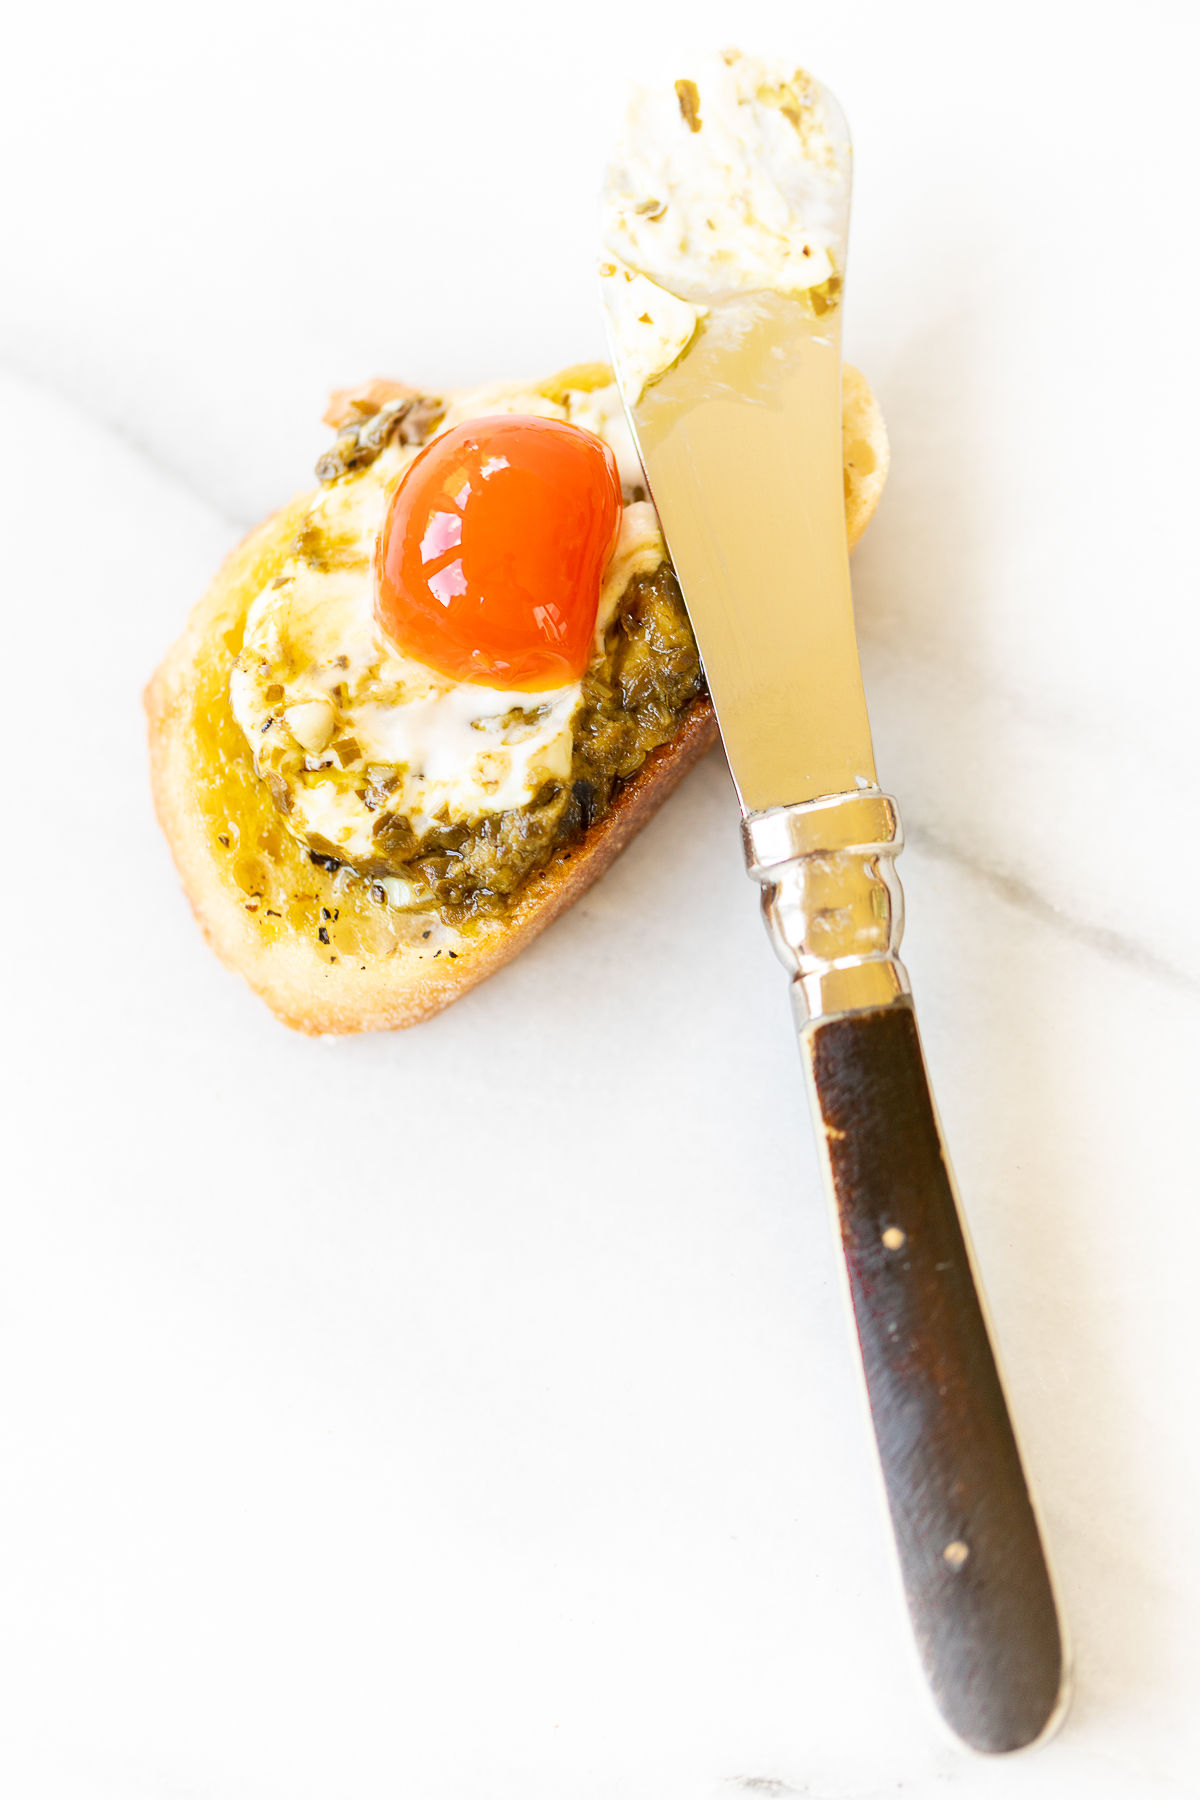 A piece of bread with an egg on it and a pesto cheese dip.